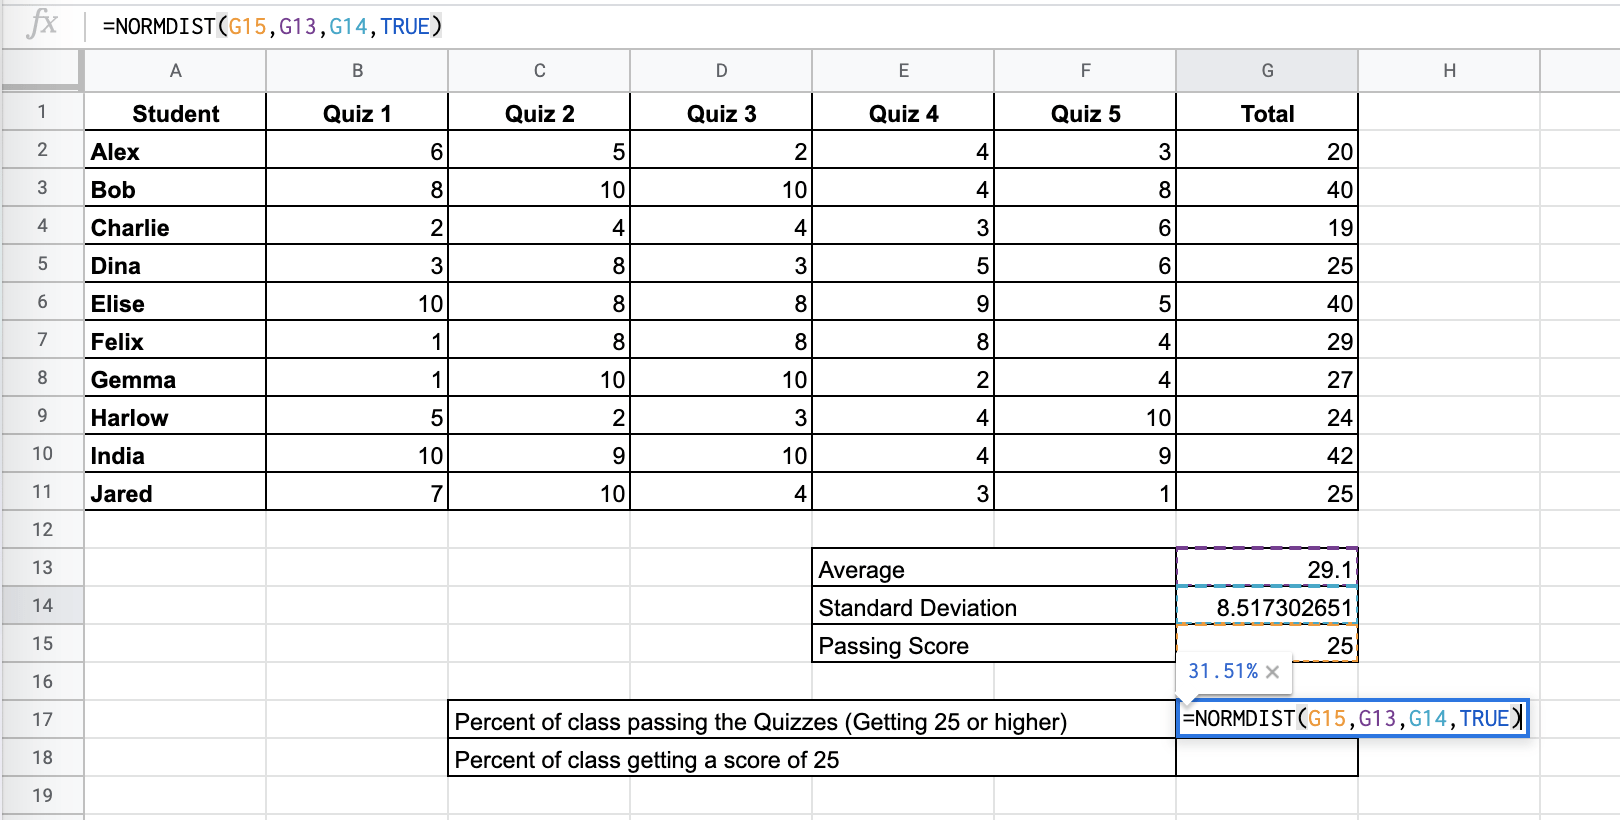 How to Use the NORMDIST Function in Google Sheets